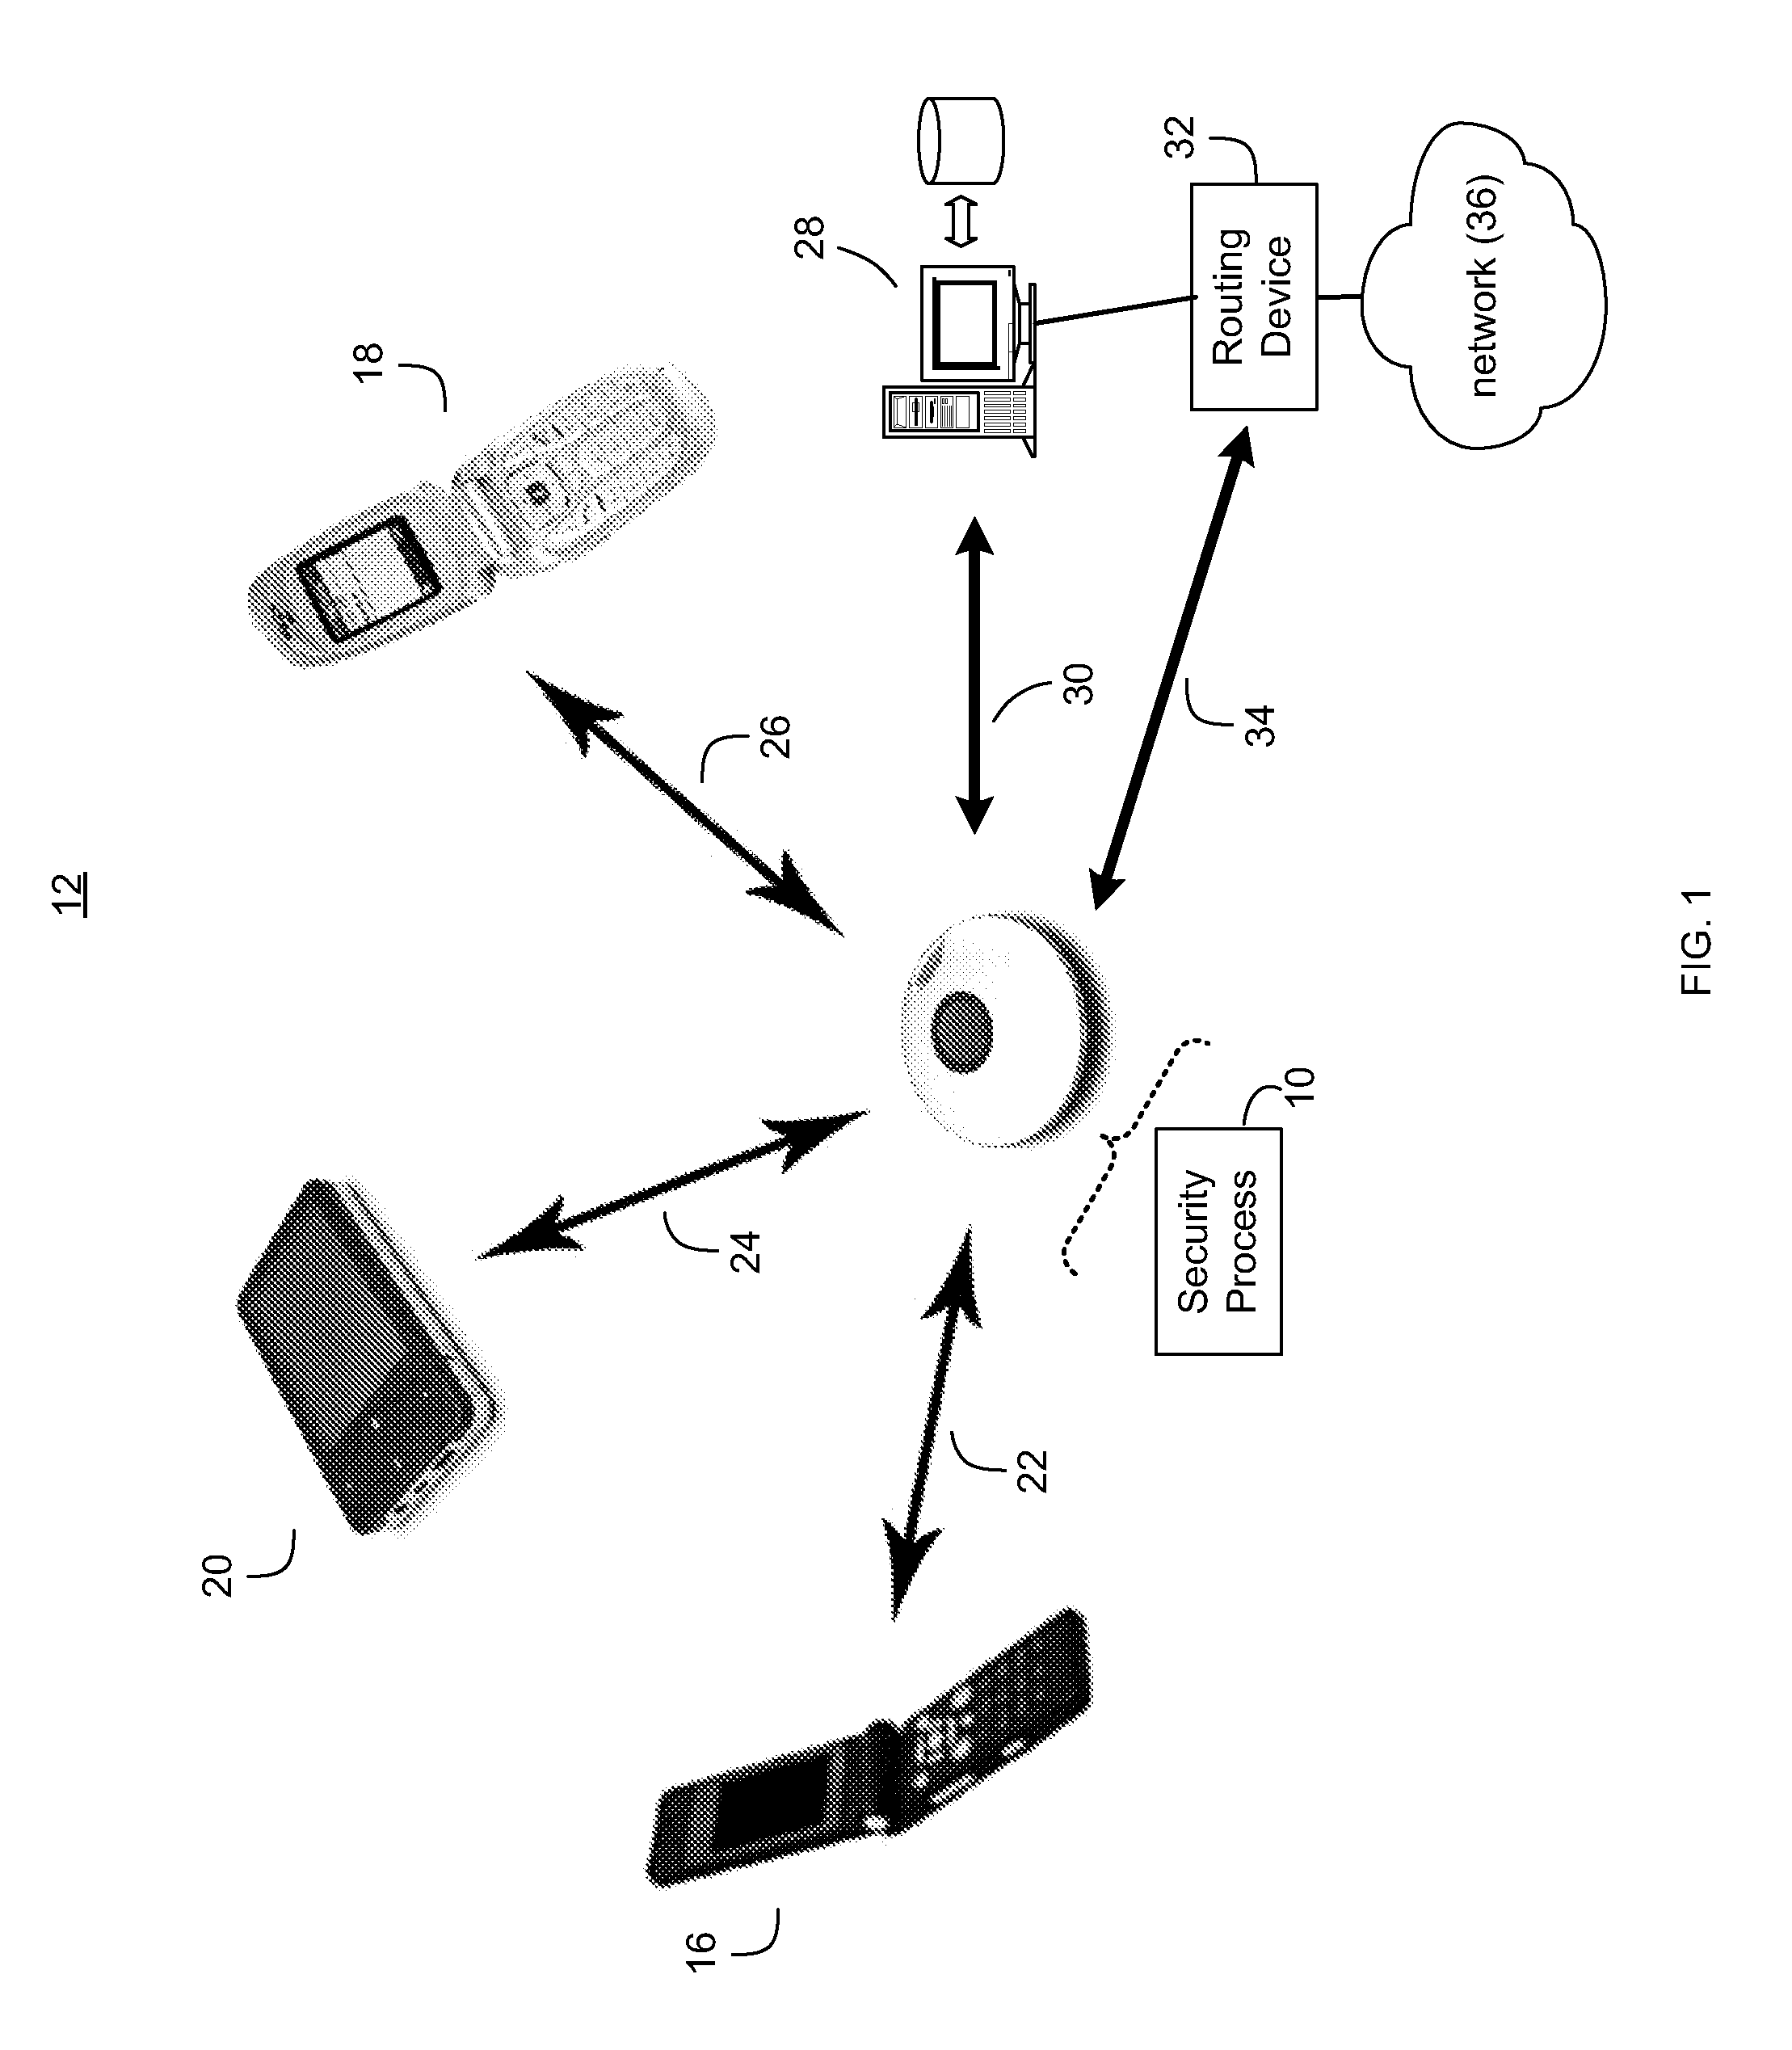 Wireless security device and method